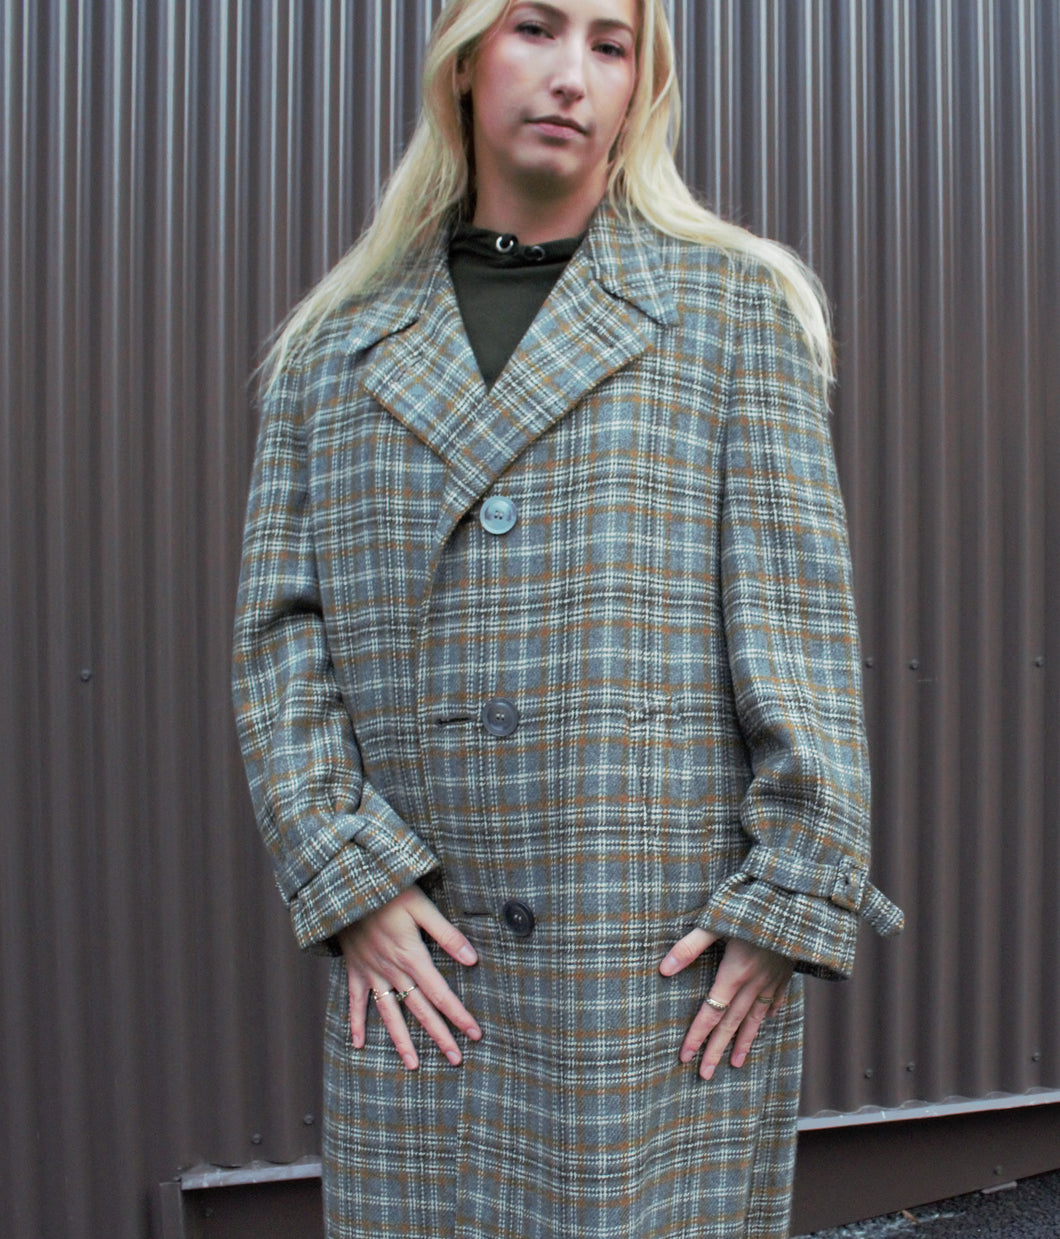 Kingspier Vintage - Vintage Maus and Hossman grey plaid wool blend overcoat with button closures, slash pockets, partially lined with inside pockets. The fibres are unknown but it feels like a cashmere blend. Union made in USA, Size large/ XL.
